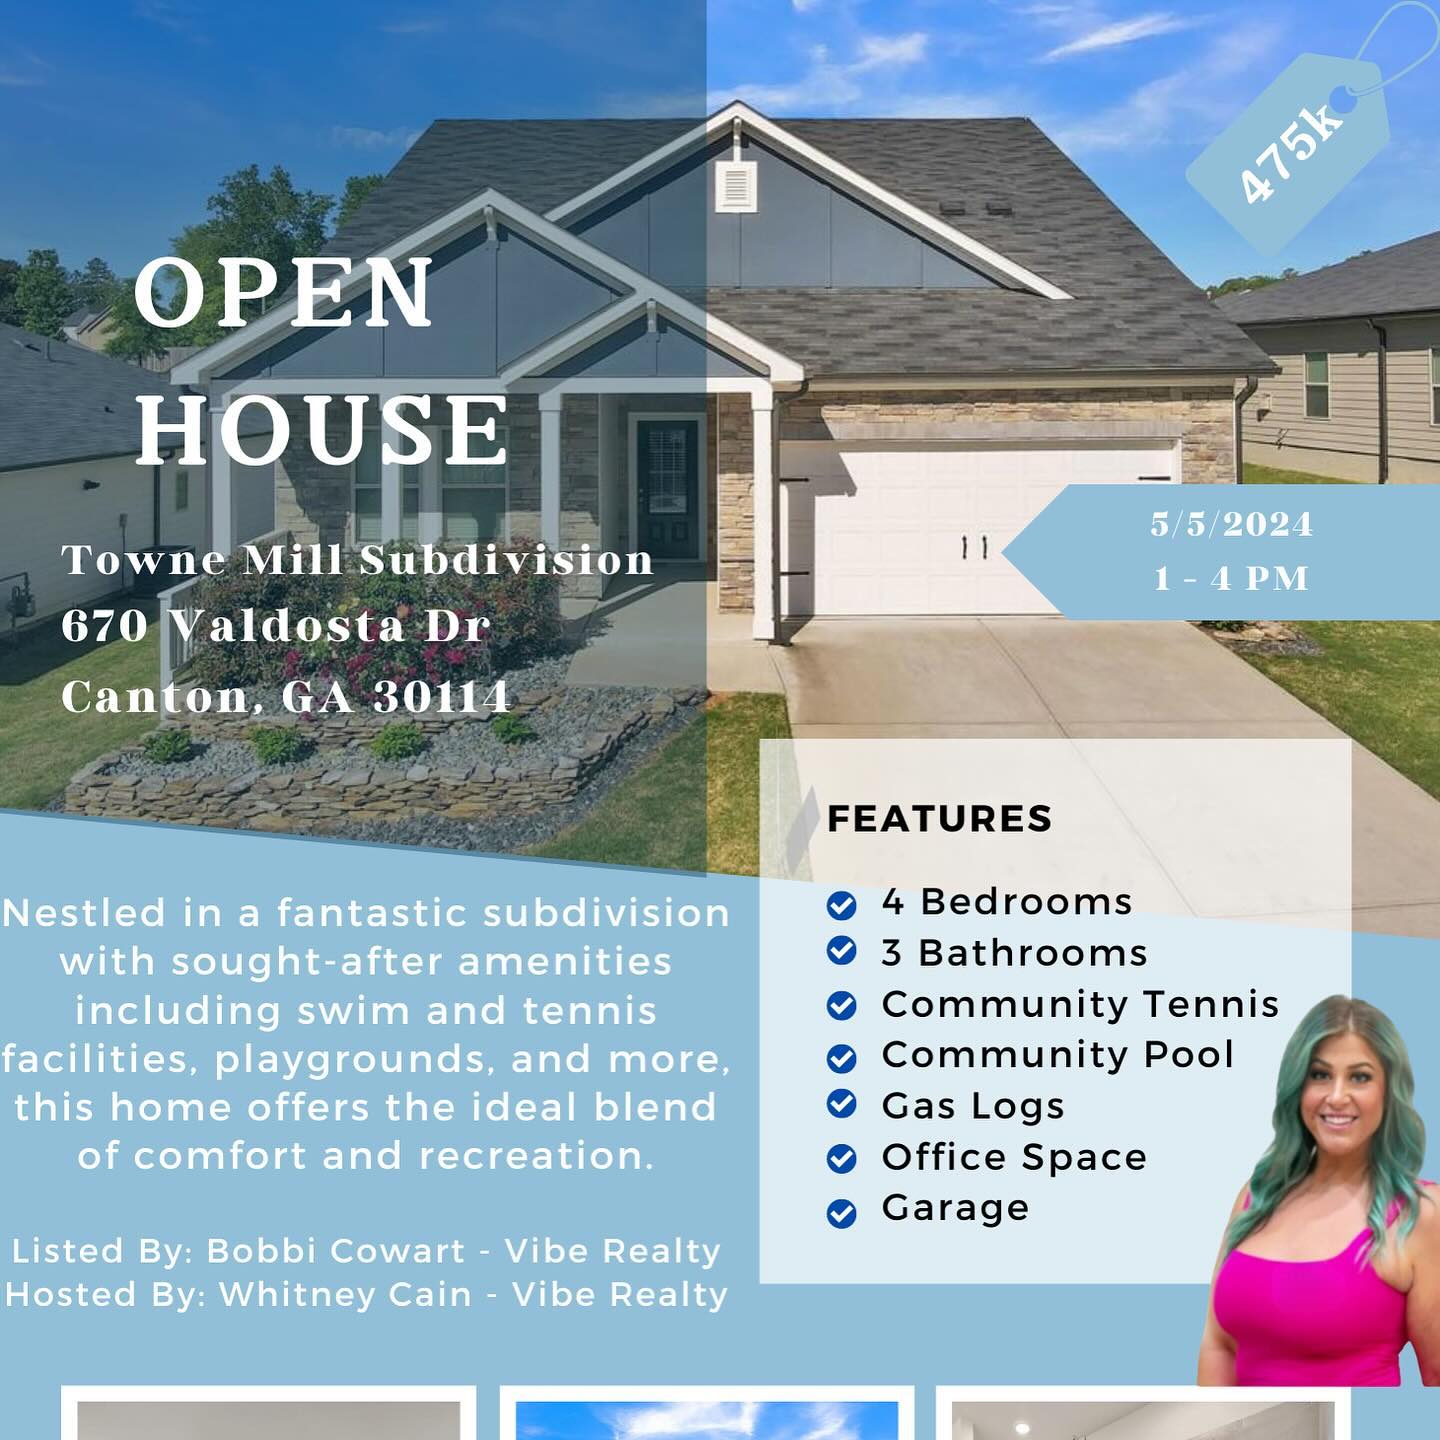 Don’t forget! I’m hosting an open house TOMORROW in Towne Mill Subdivision in Canton, GA. Swipe ➡️ for more info. Margaritas on me 🪅 for Cinco de Mayo 🤗 

Whitney Cain | Realtor®️
📱 770-874-7814
📧 Whitney.cain@viberealtyga.com

#thesaltyrealtor  #mermaidrealtor #turquoisehairedrealtor 
#realestate #realestateagent #acworthga #realestatelife #realtor #realtorlife #realtor® #realtorsofig #realtors #home #homesweethome #homedesign #interior #interiordesignideas #garealtor #garealestateagent #atl #atlanta #atlantarealtor #atlantarealtors #atlantarealtorlife #atlantarealestate